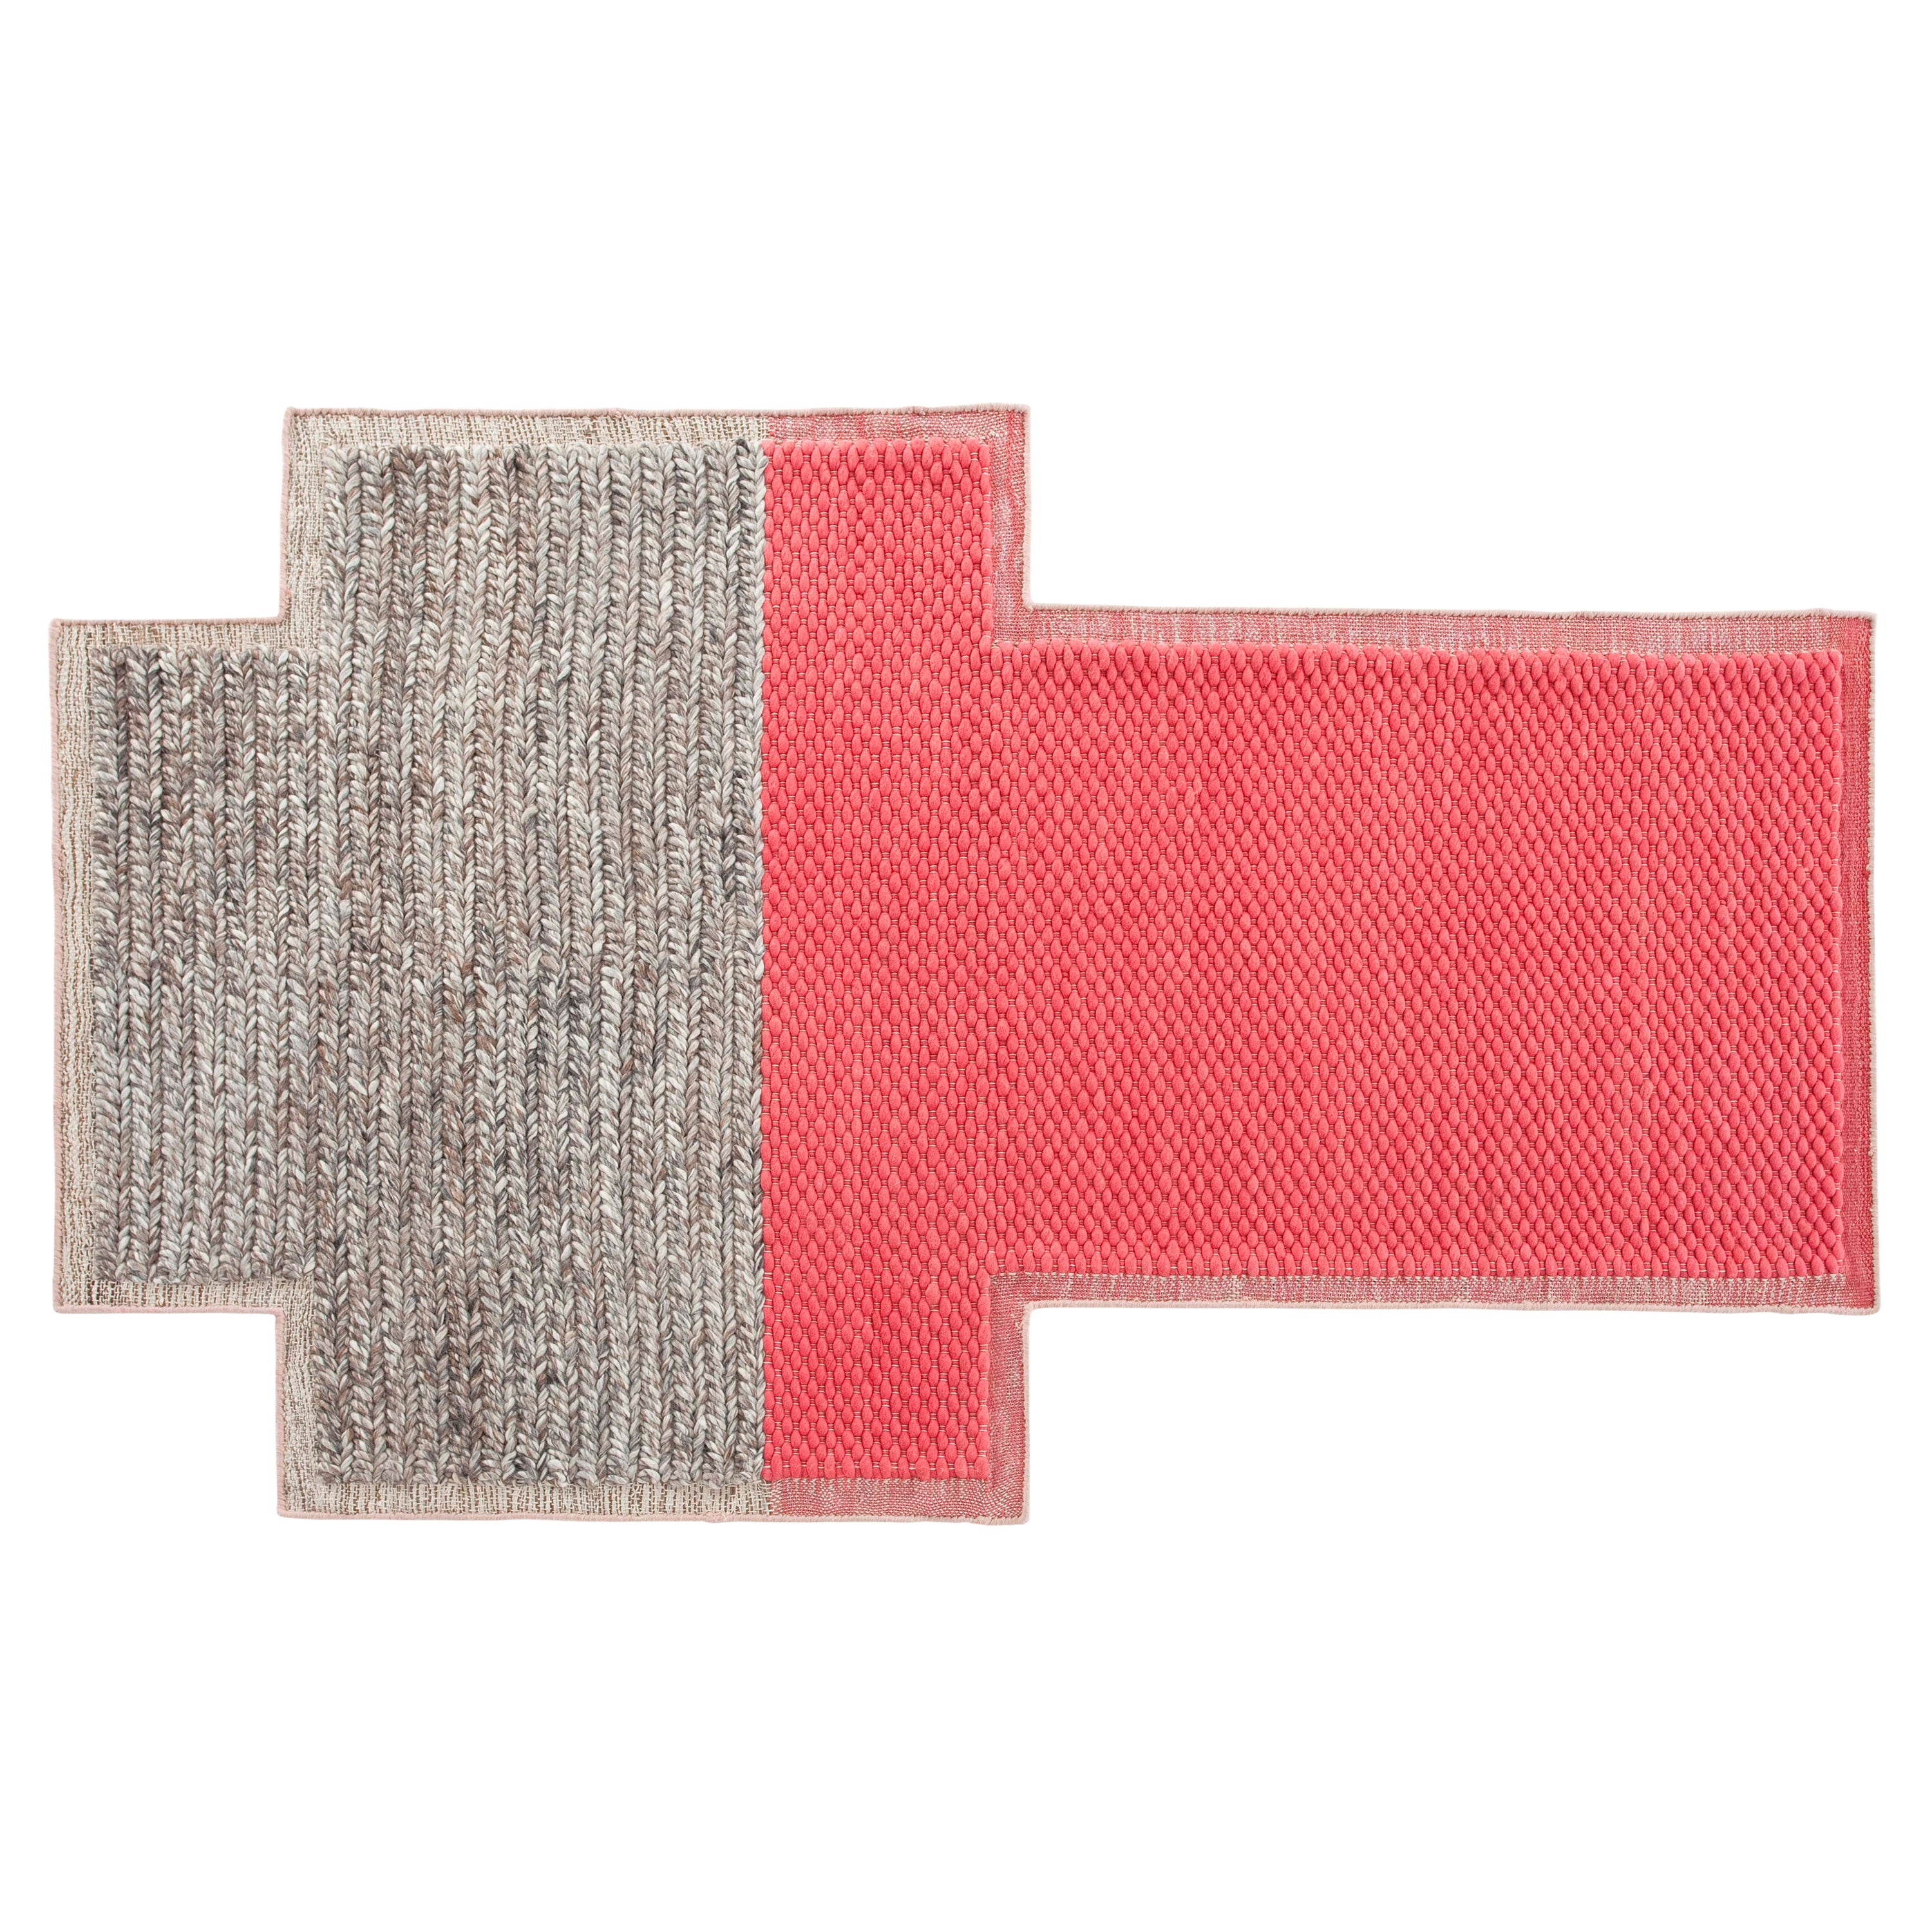 GAN Mangas Space Small Rectangular Rug Plait in Coral by Patricia Urquiola For Sale